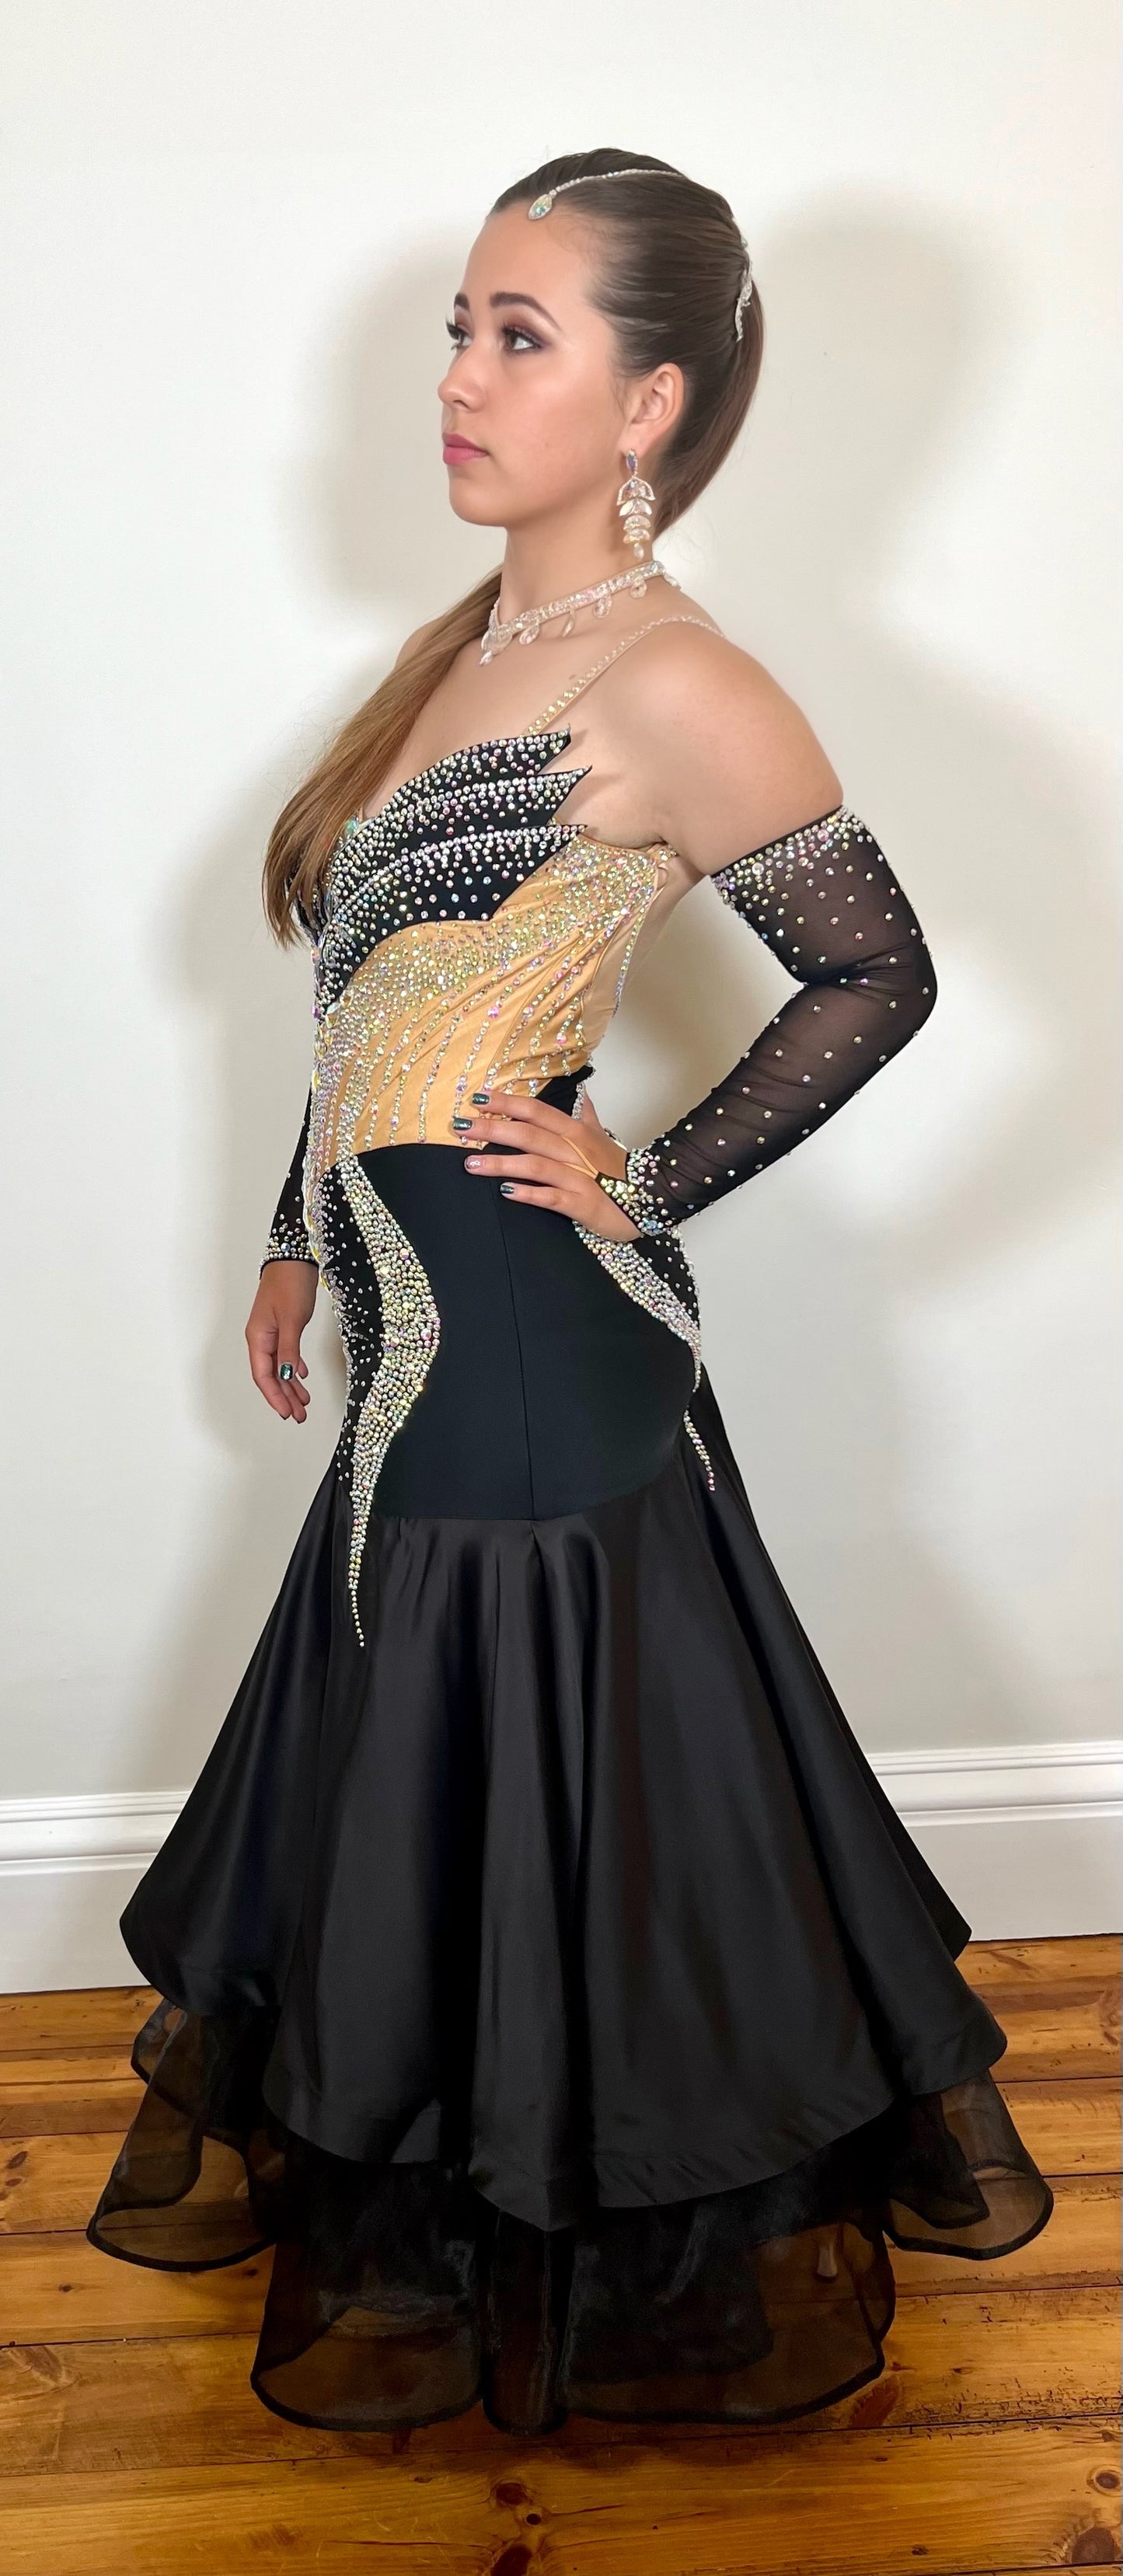 166 Striking Black layered skirt Ballroom Dress. Decorated with AB stones on a structured bodice. Flesh panelling & stunning detail throughout. Stoned gloves